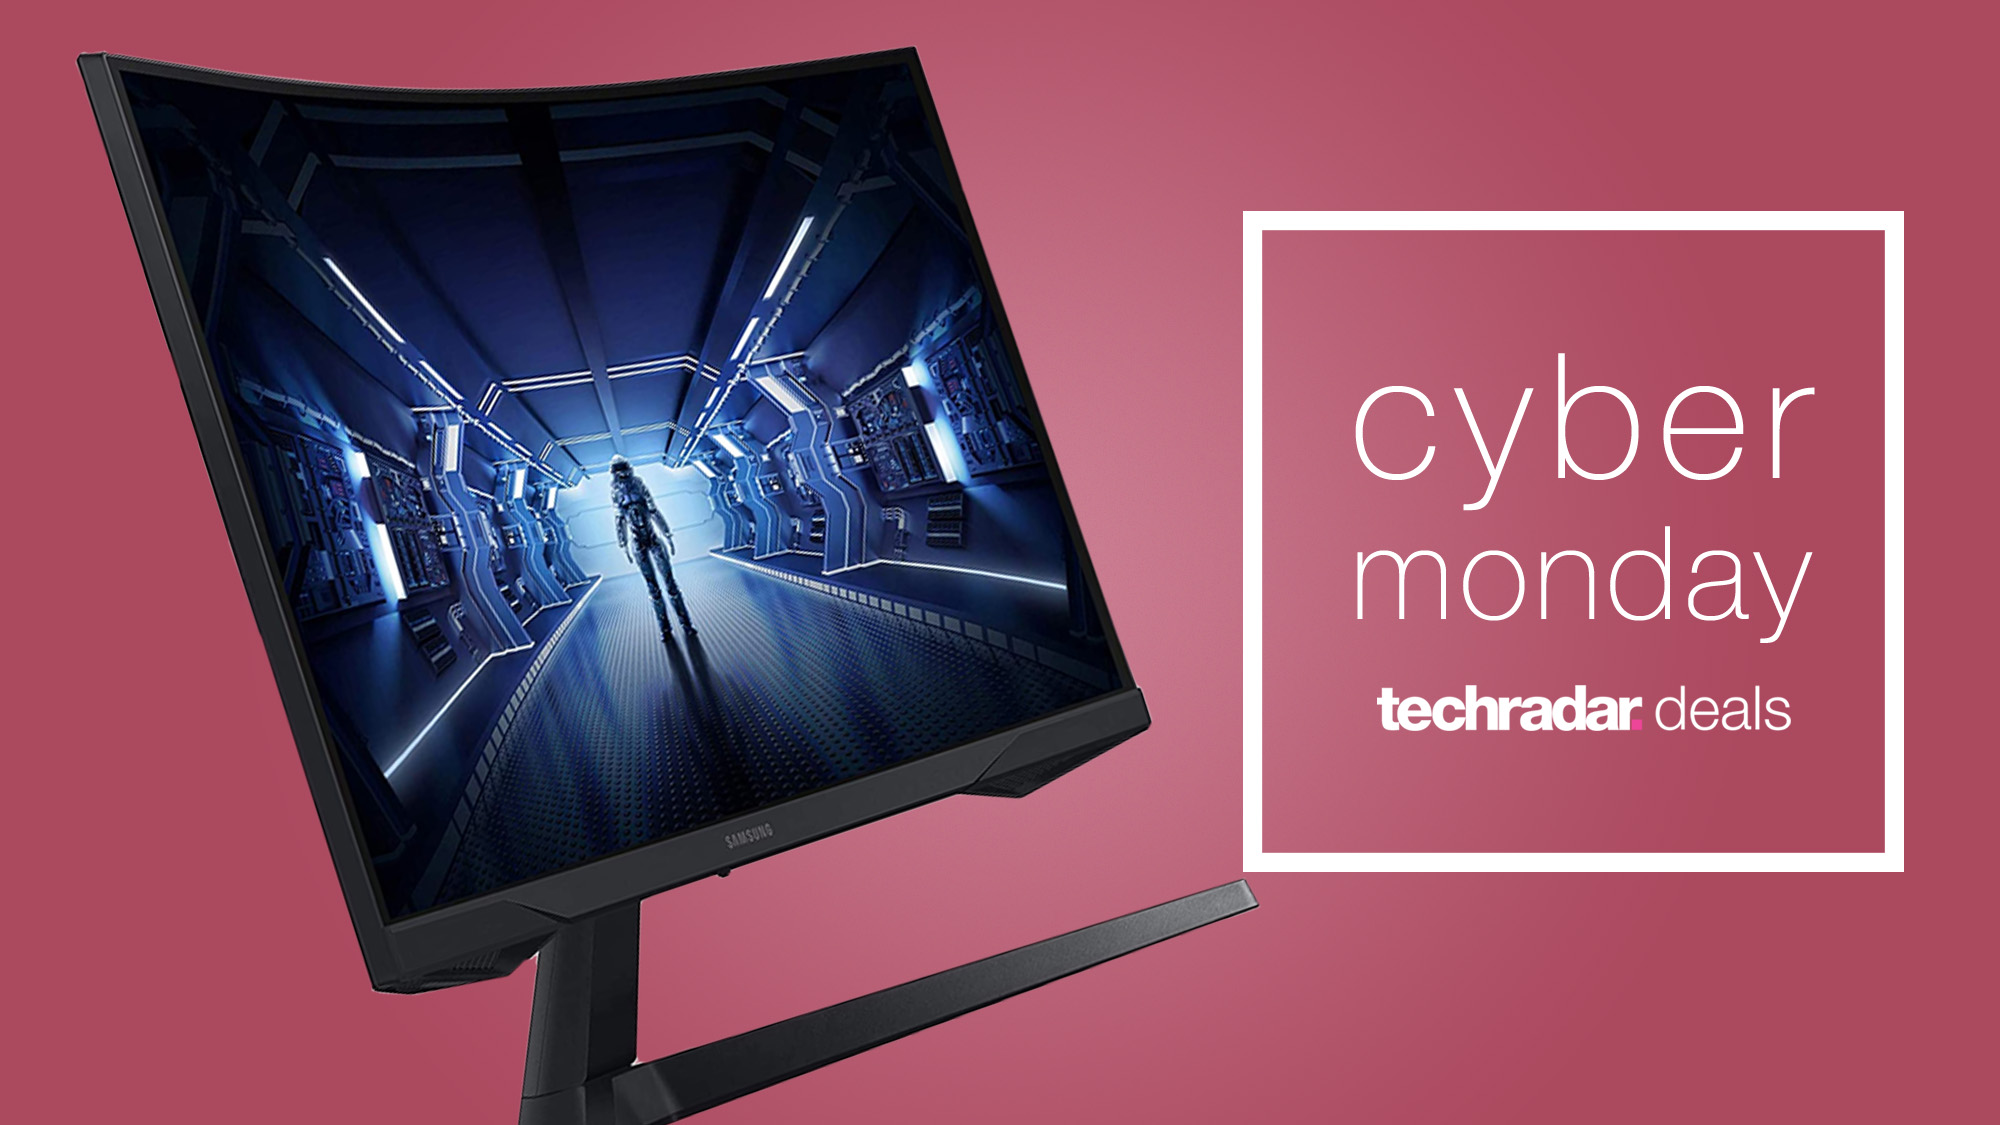 A Samsung gaming monitor against a pink background with a TechRadar Cyber Monday monitor deals badge